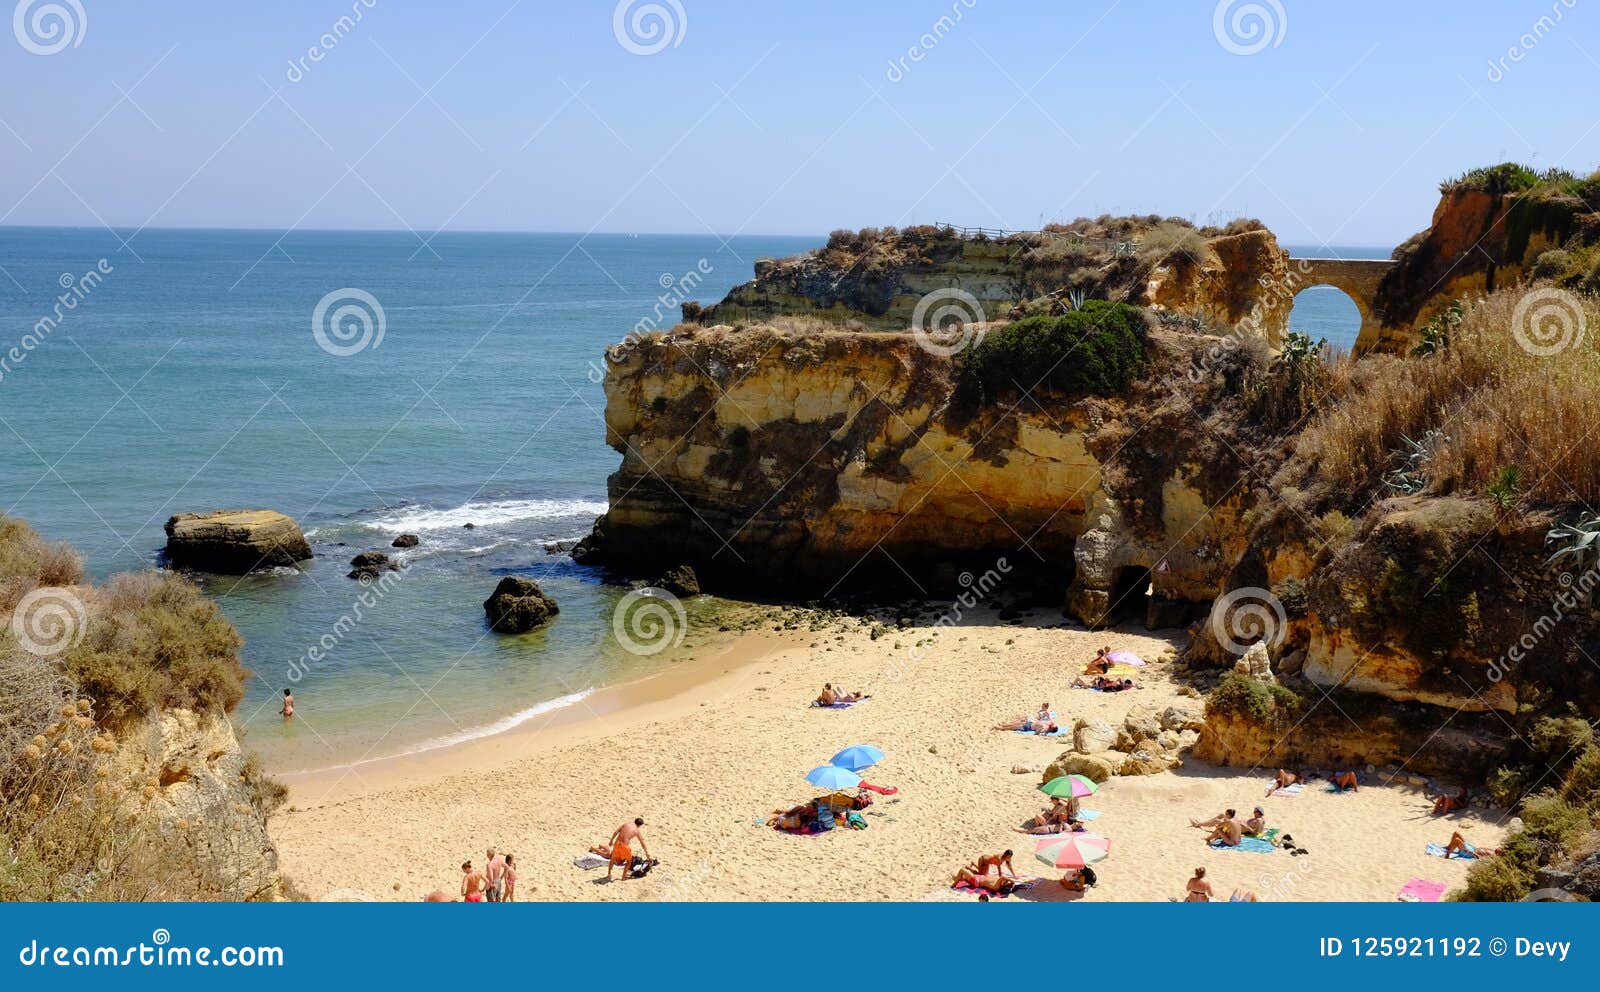 Tourism at the South Coast in the Portugal Editorial - of ocean: 125921192